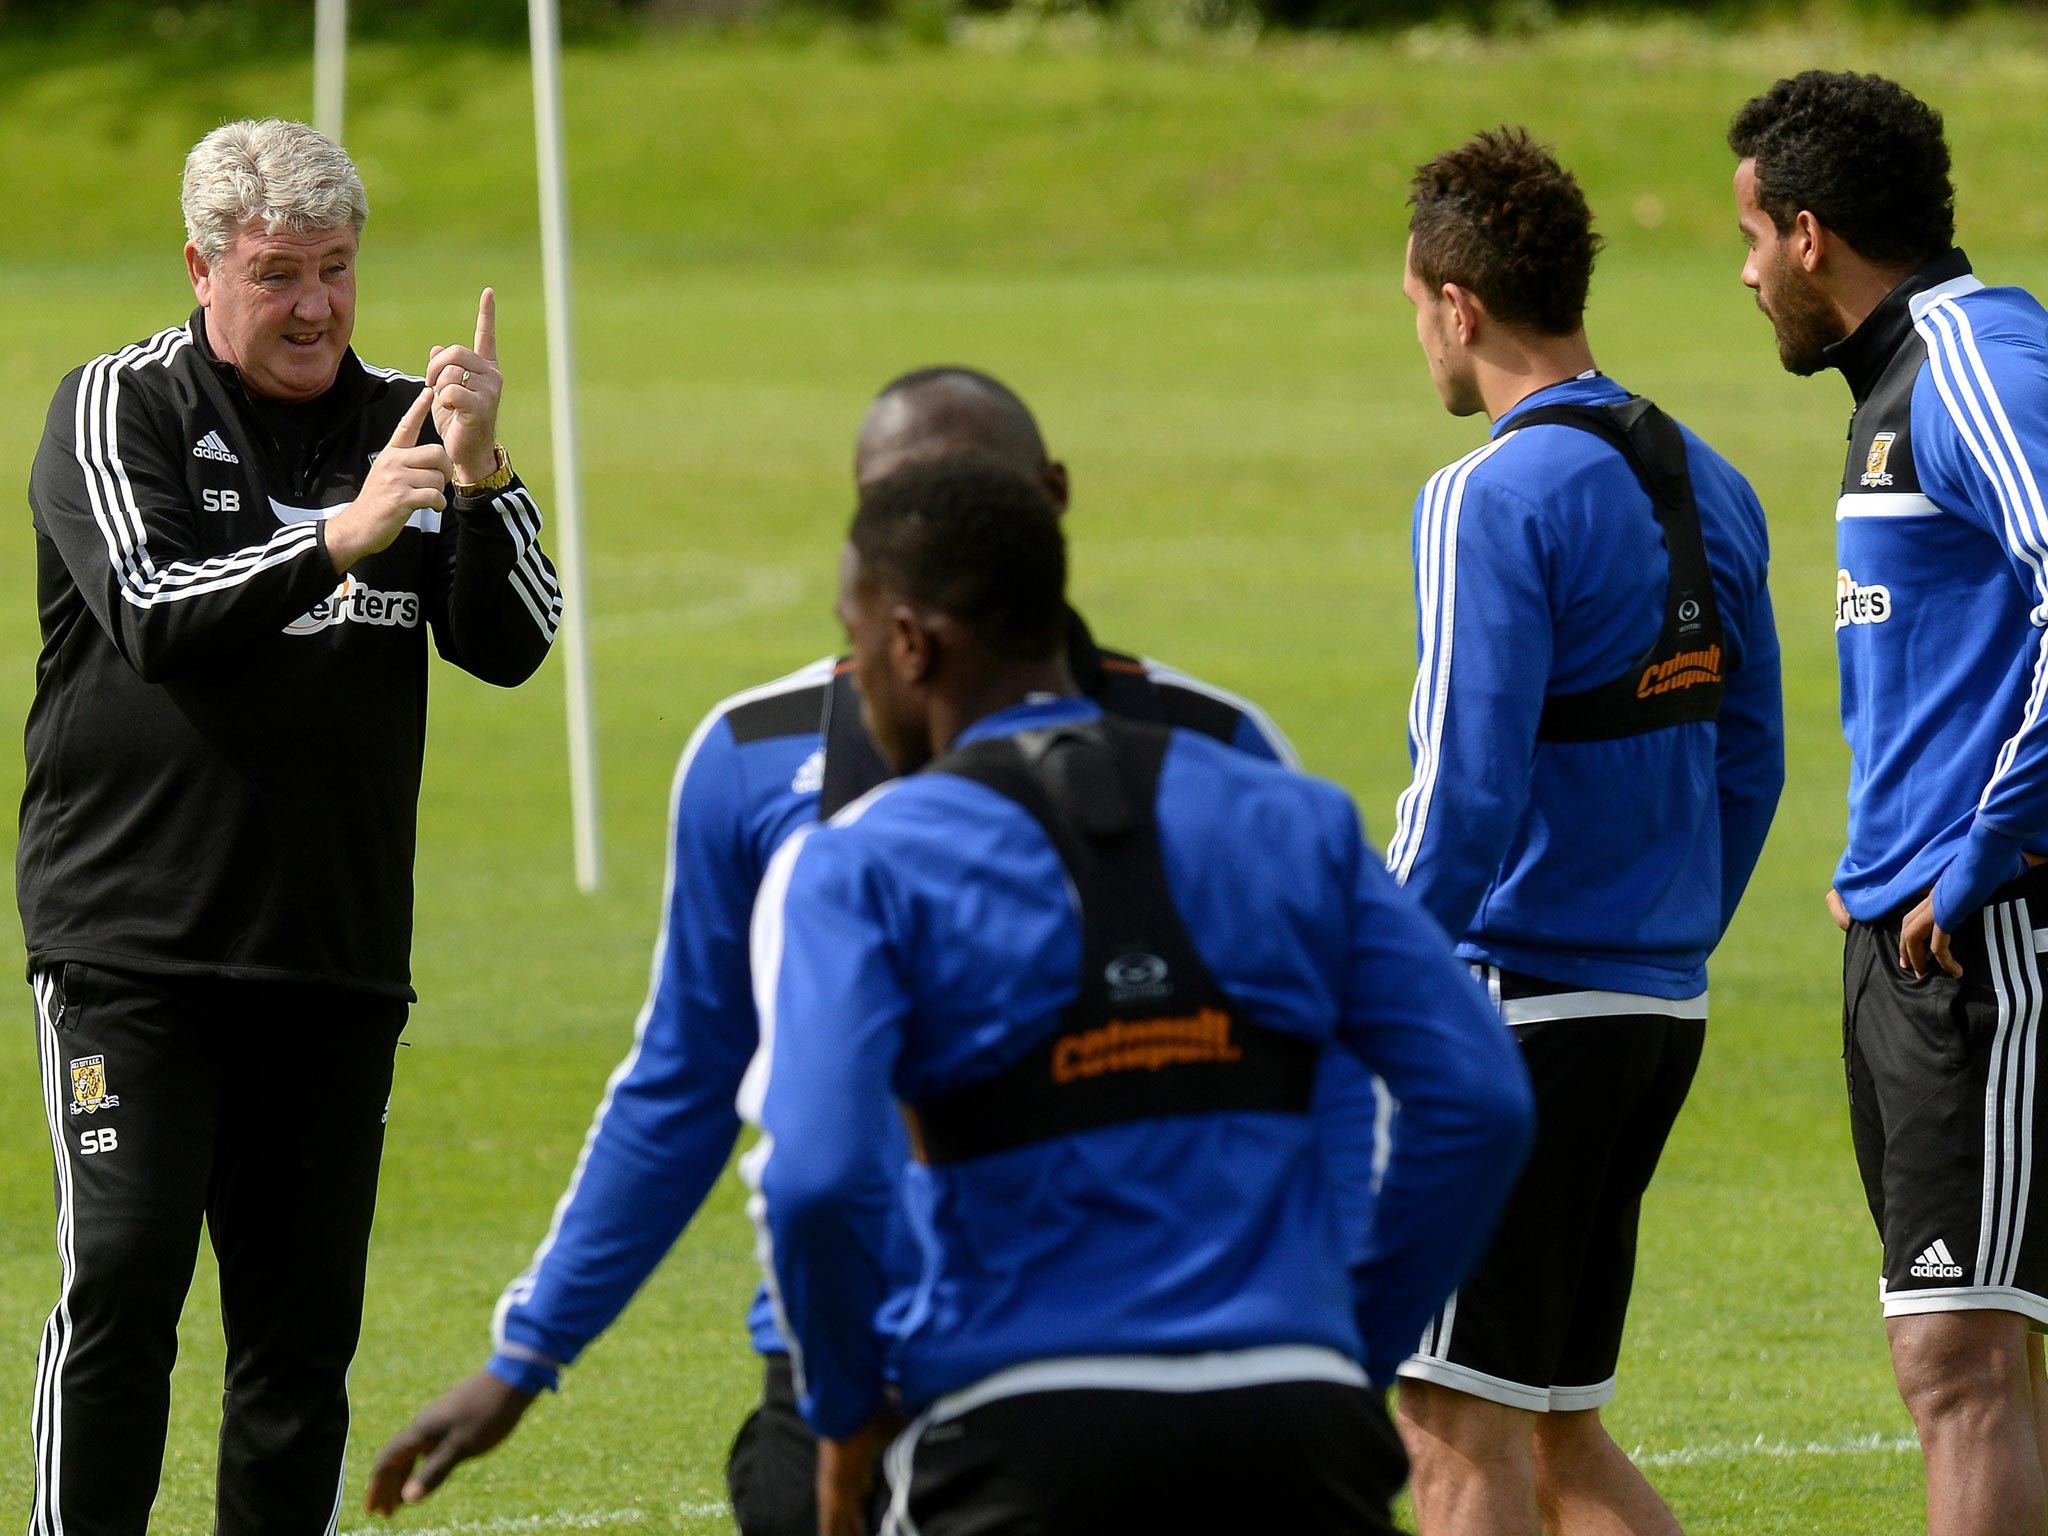 Steve Bruce discusses tactics with his players during a training session this week